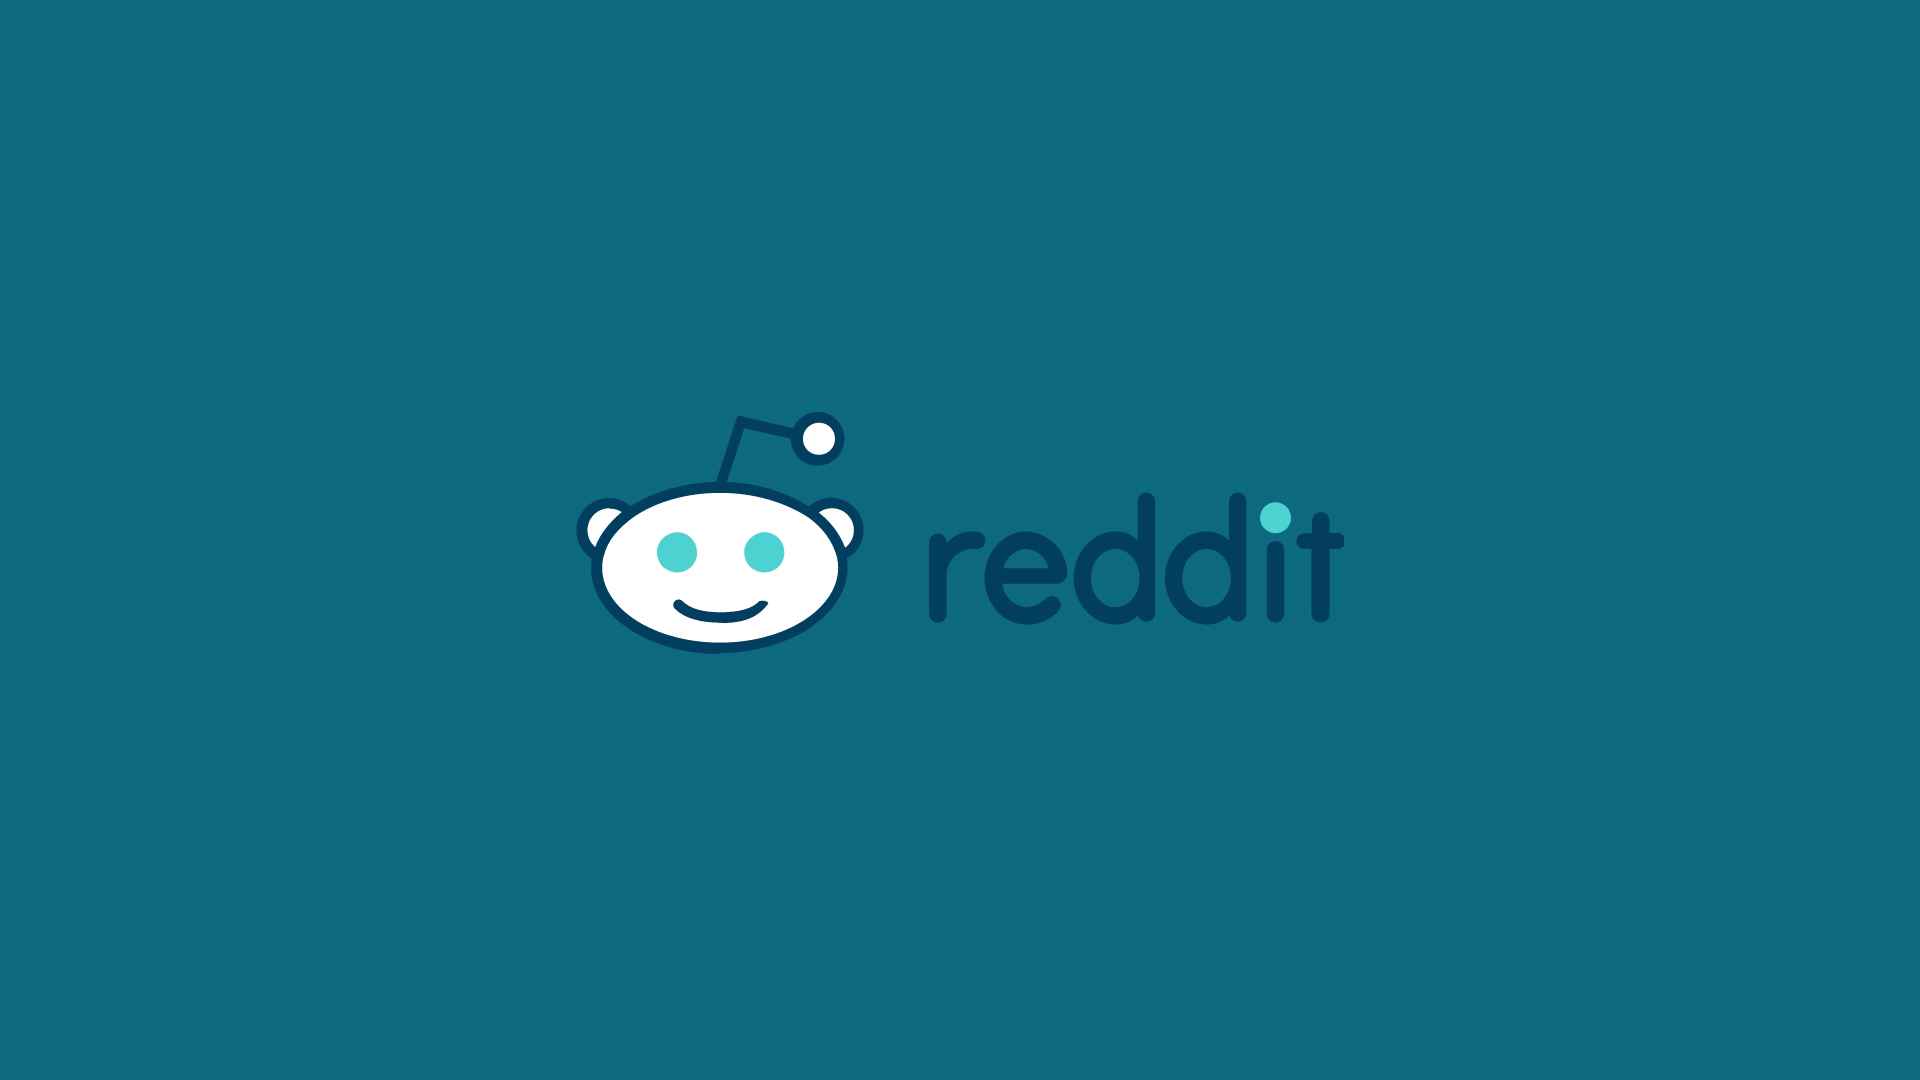 Are there any tools or features to report inappropriate or offensive content on Reddit?